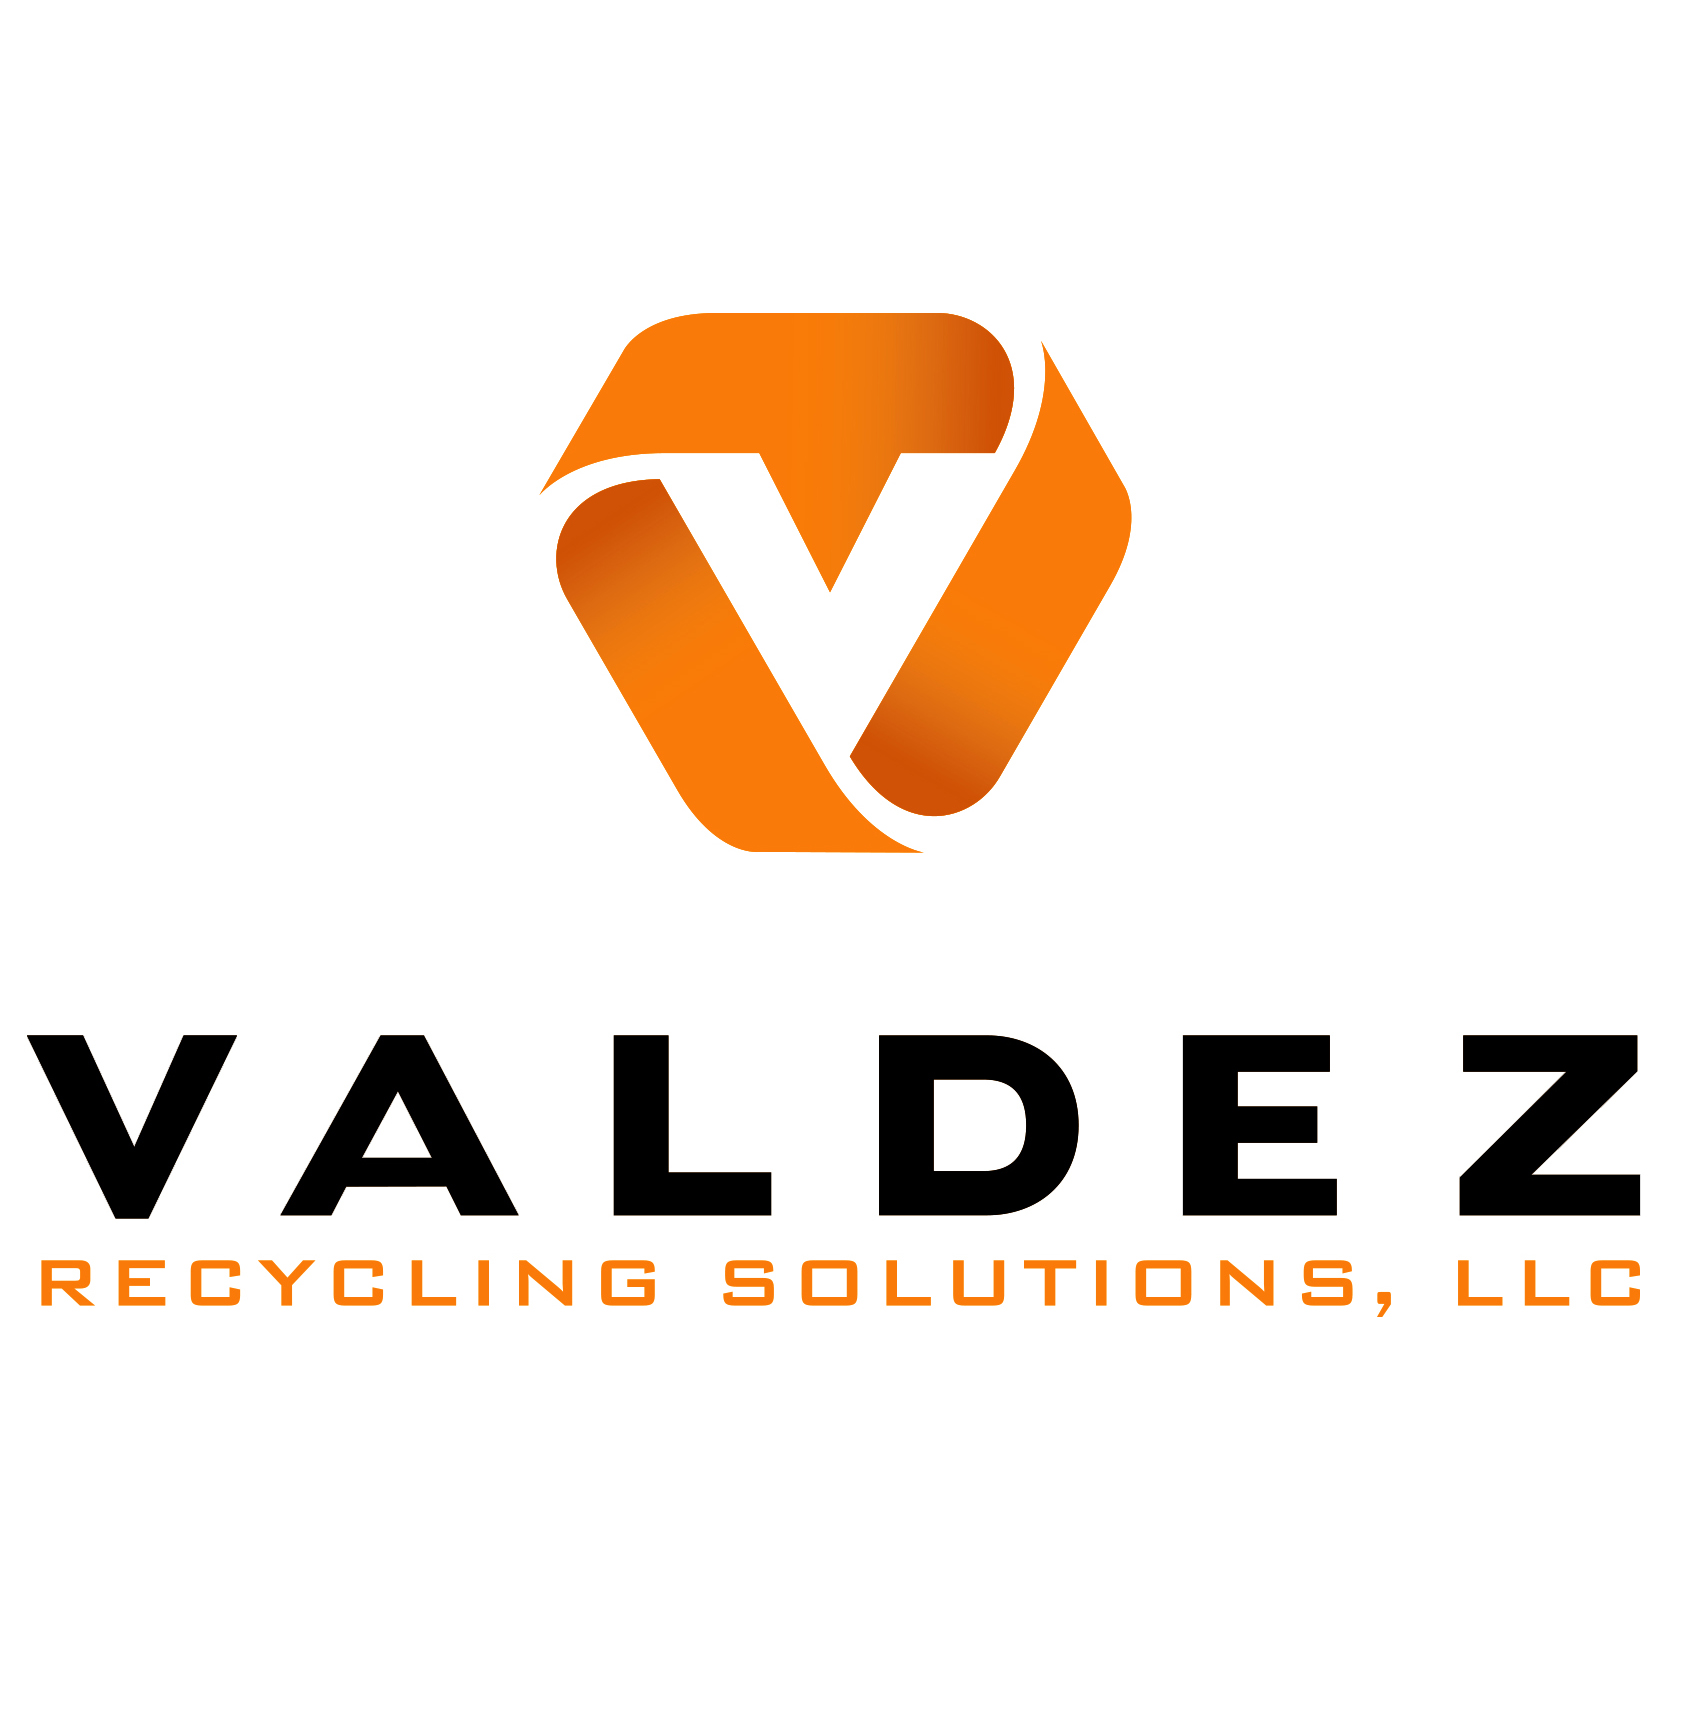 Valdez Recycling Solutions, LLC logo design by logo designer Greg Valdez Design for your inspiration and for the worlds largest logo competition